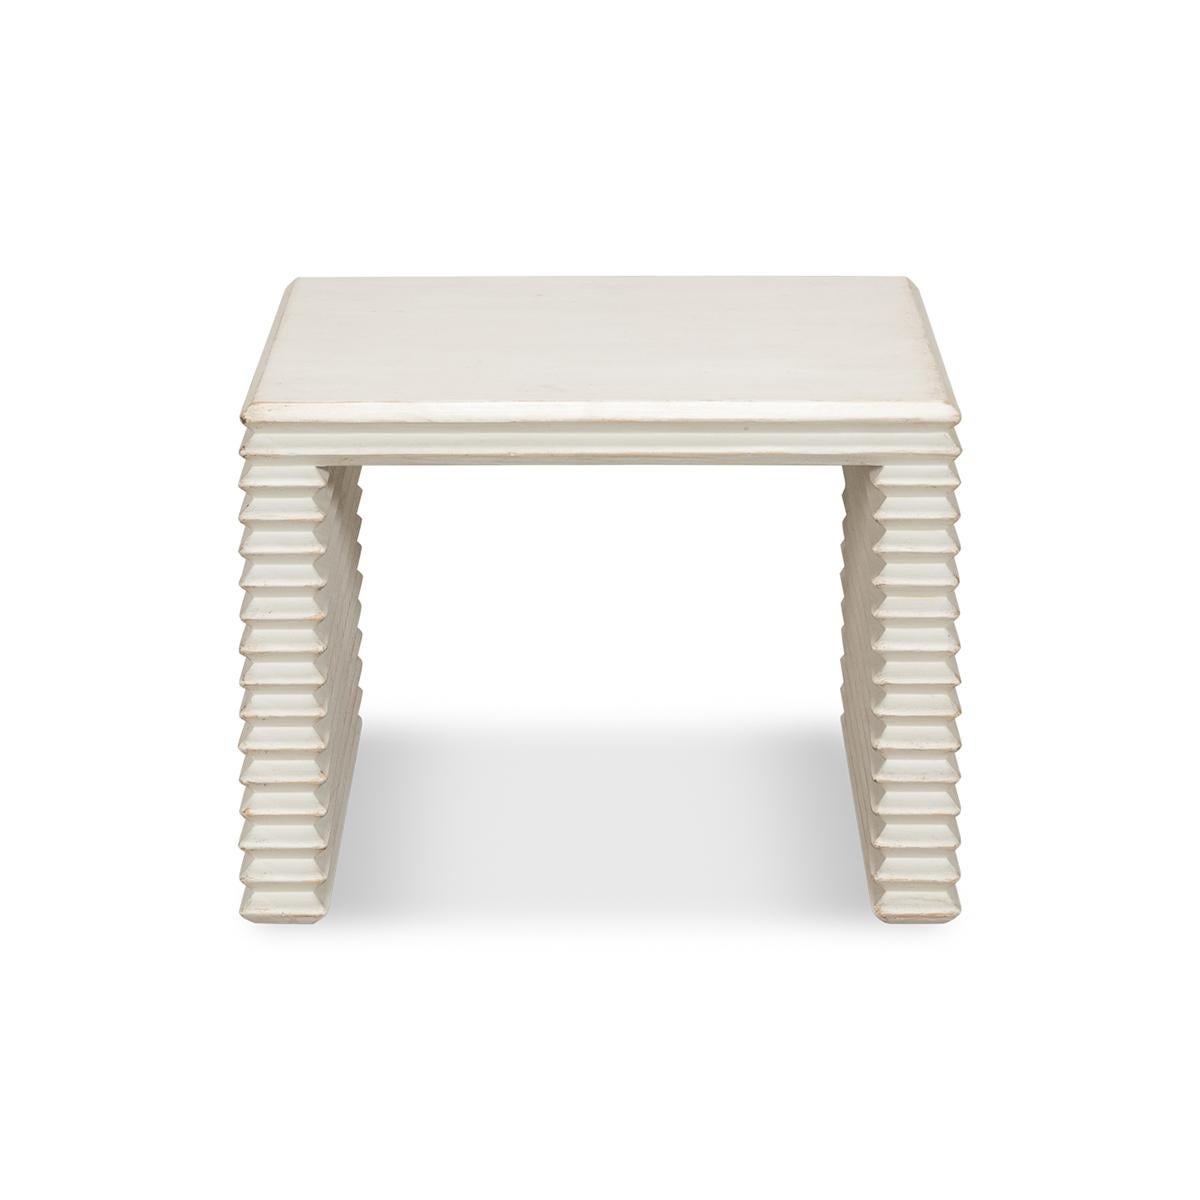 Stacked Antique white painted stool with a striking yet simple silhouette of a geometric form with a nod to Brutalist design. Made of pine with an antiqued white finish. 

Dimensions: 20